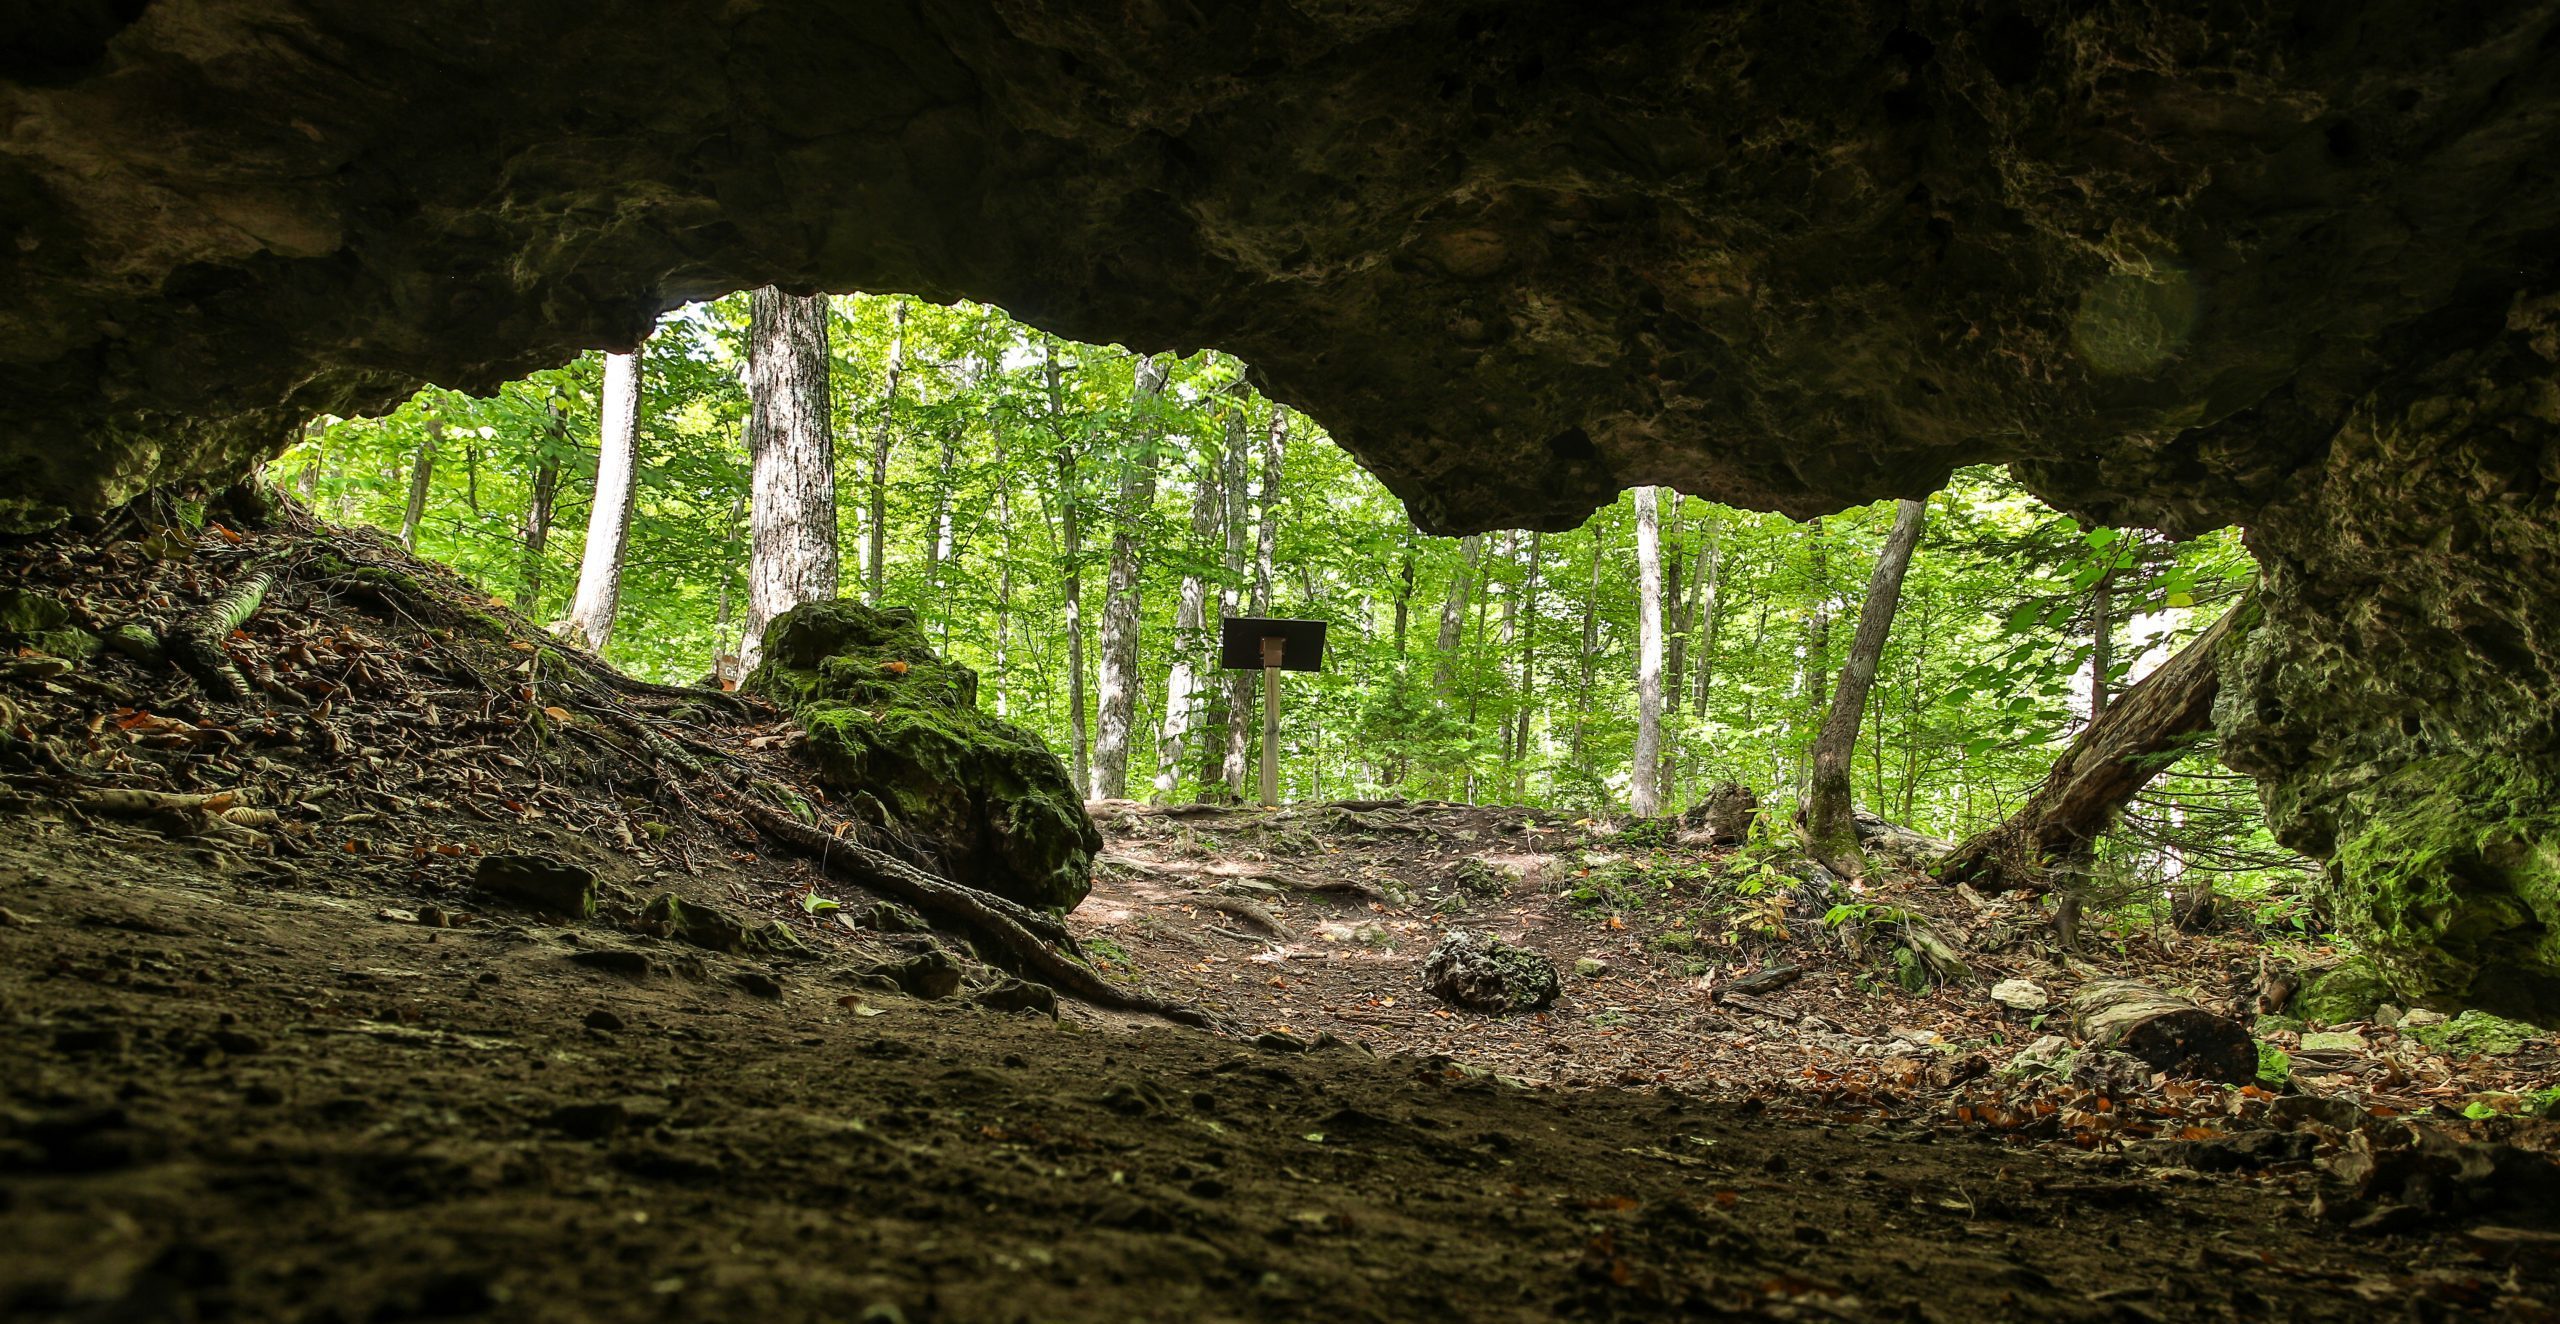 A view of the woods looking out from inside Mackinac Island’s Cave of the Woods in Mackinac Island State Park